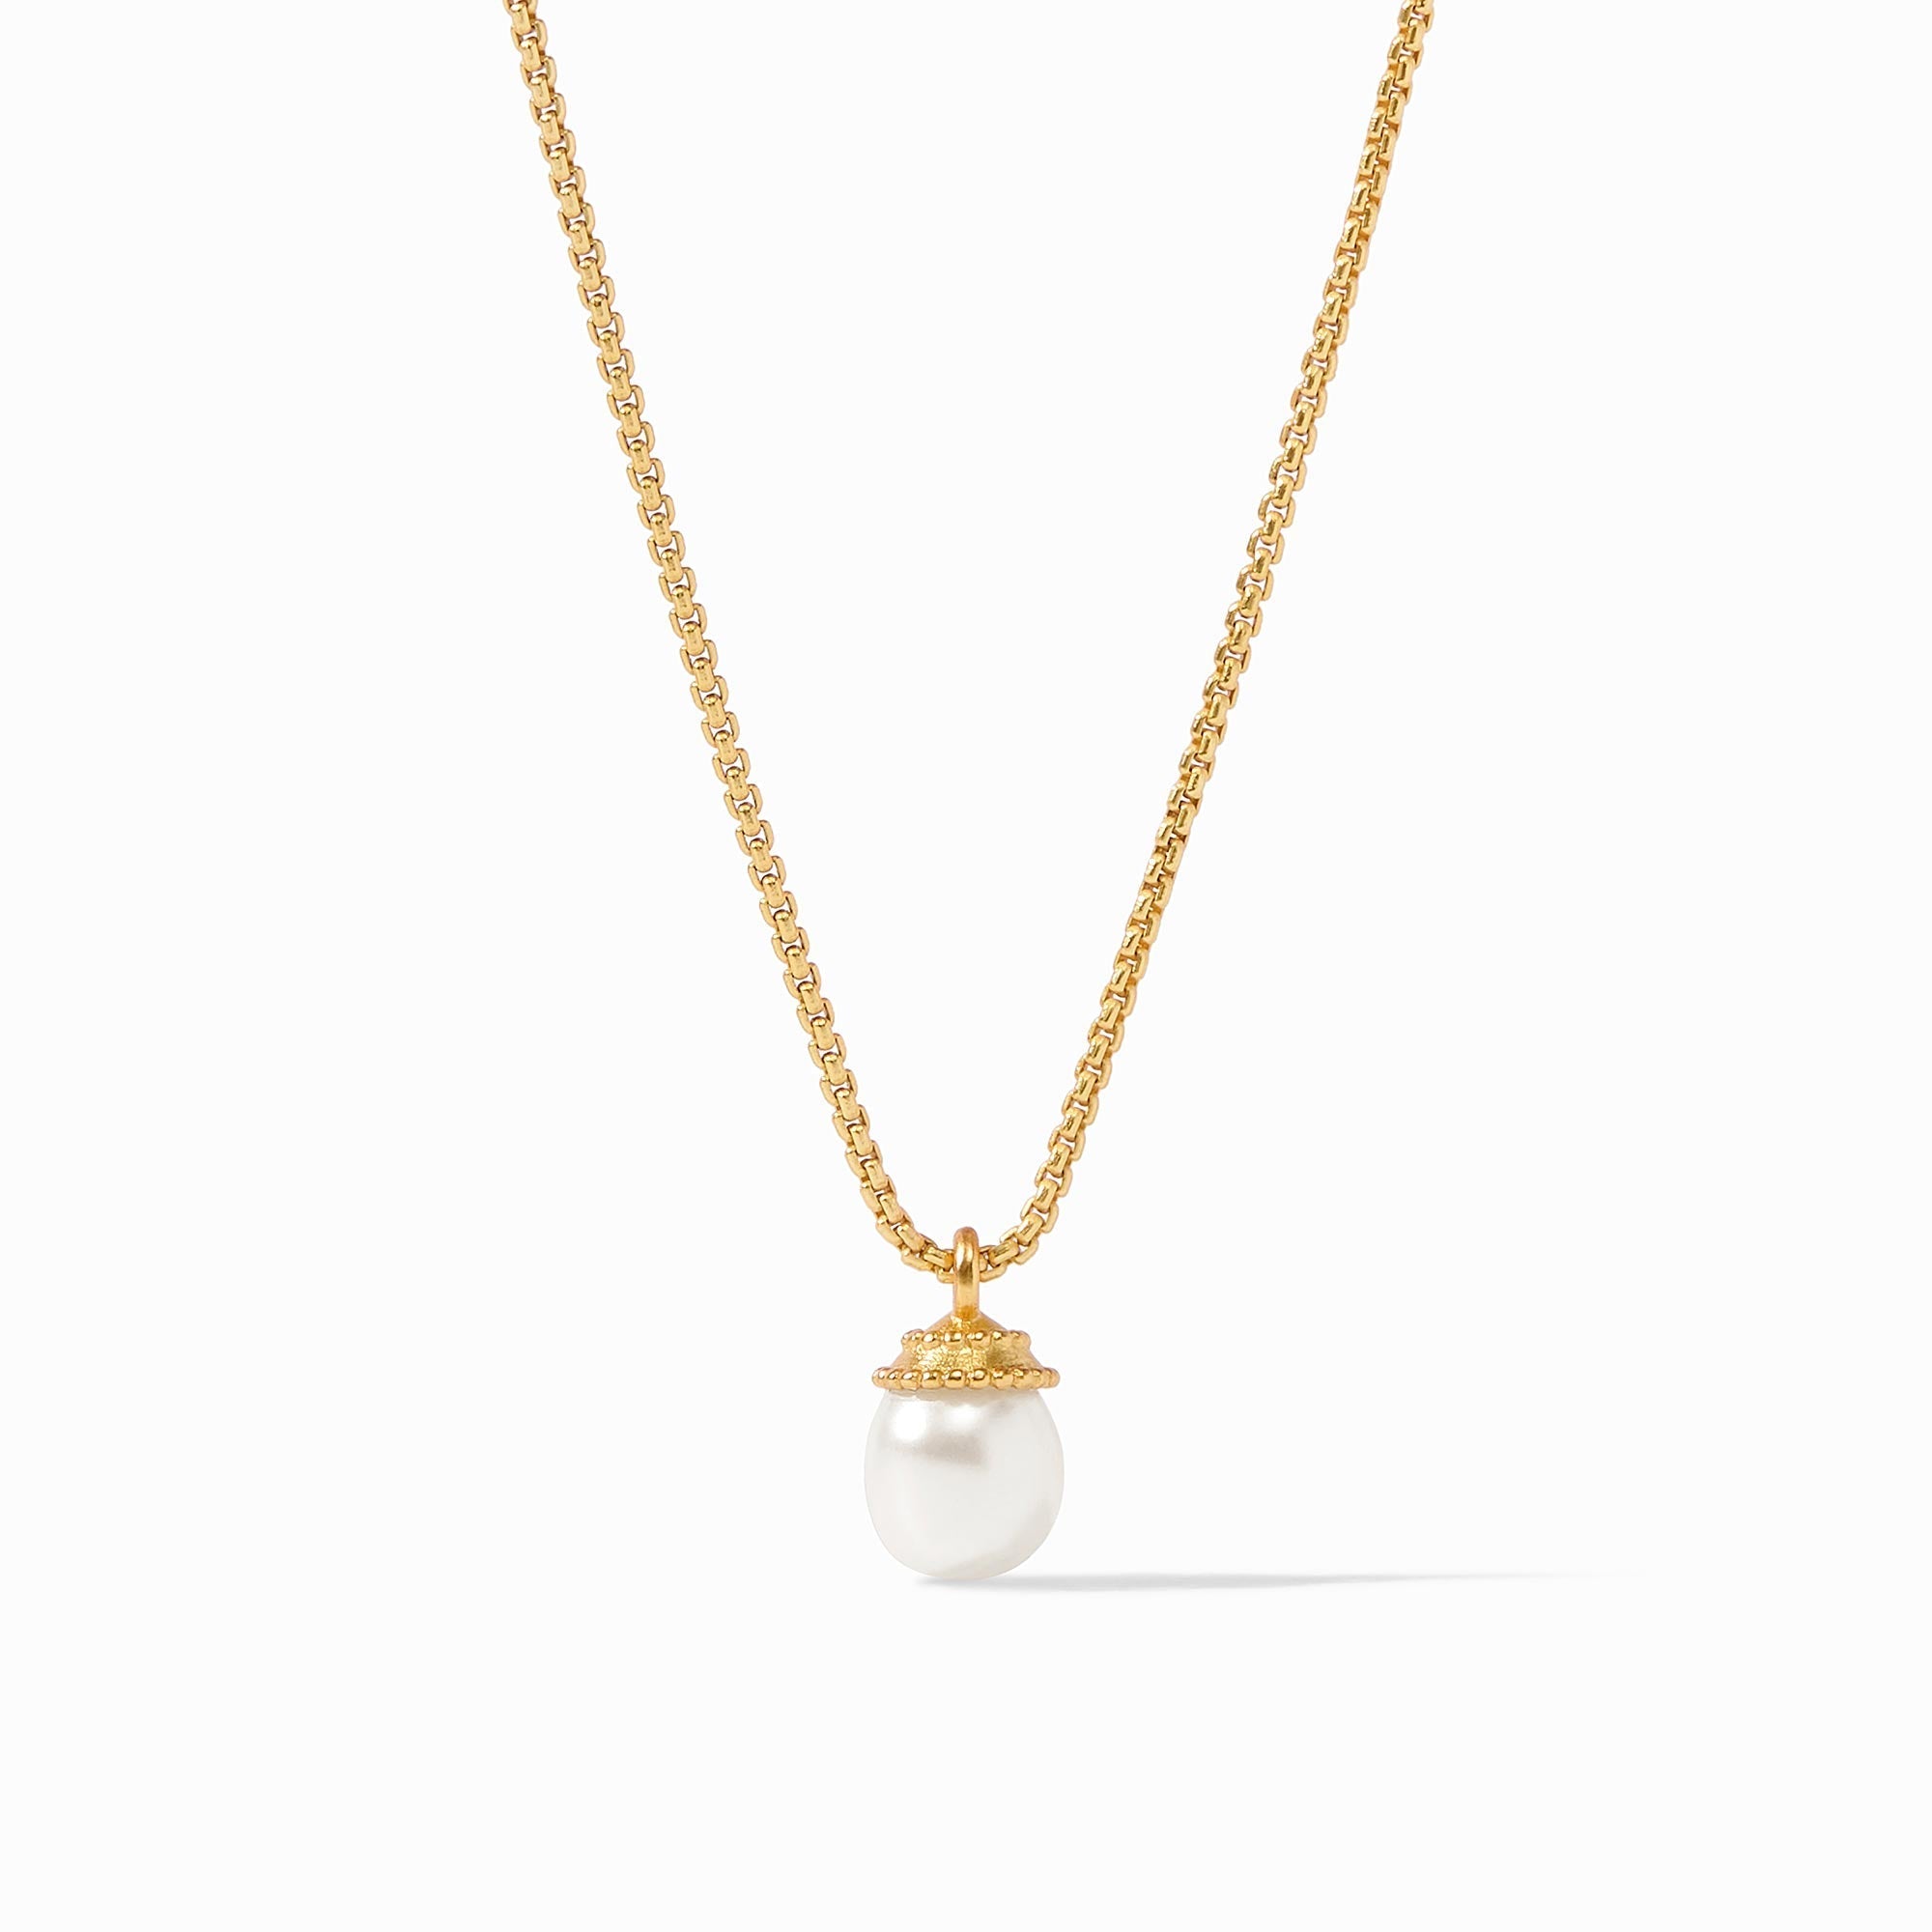 Noel Pearl Solitaire Necklace